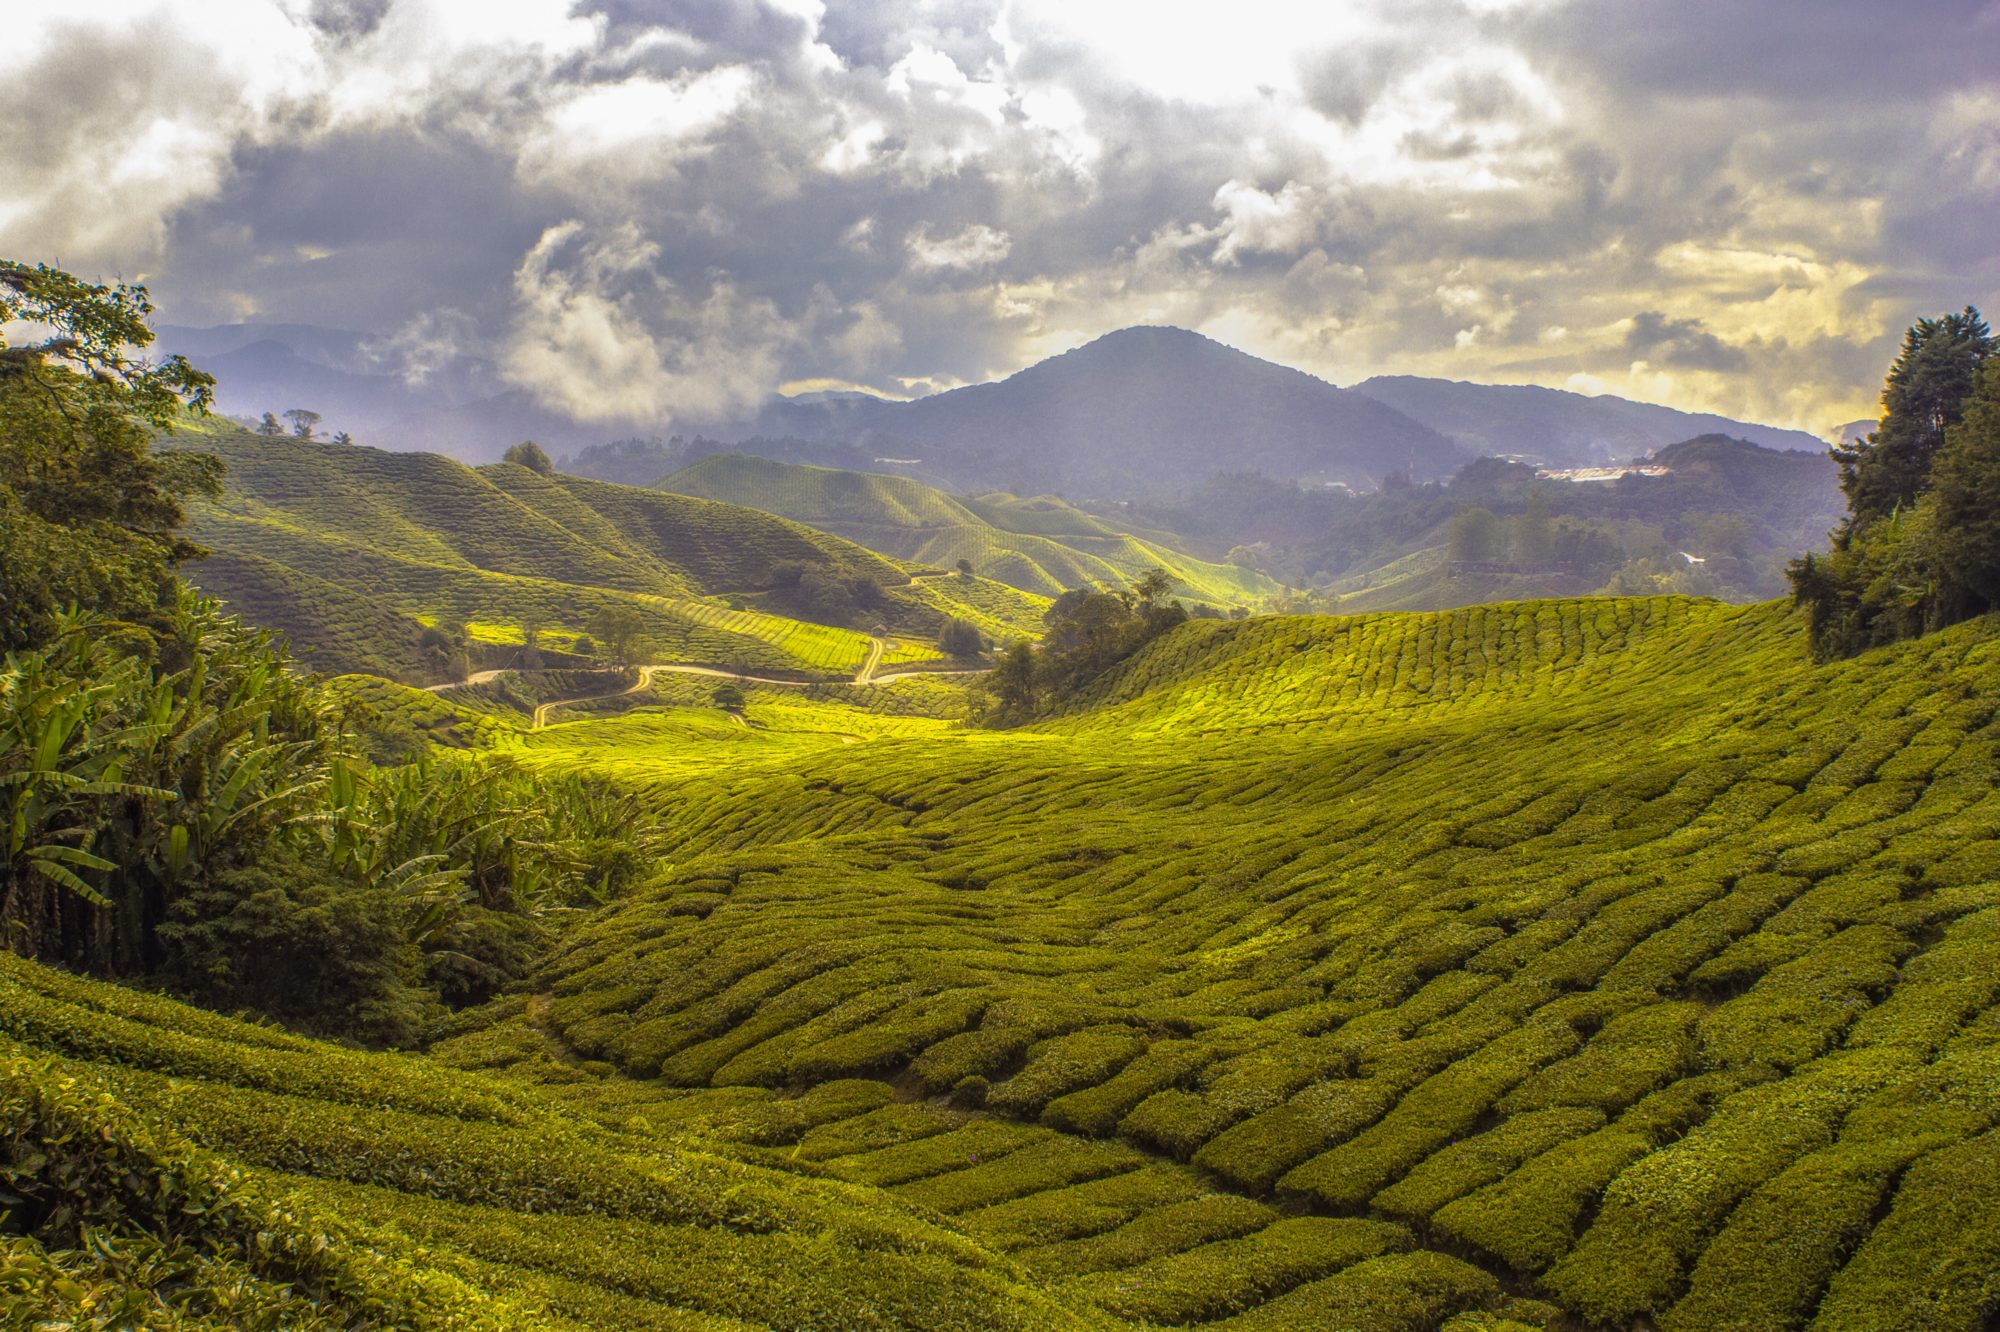 The Cameron Highlands in Malaysia